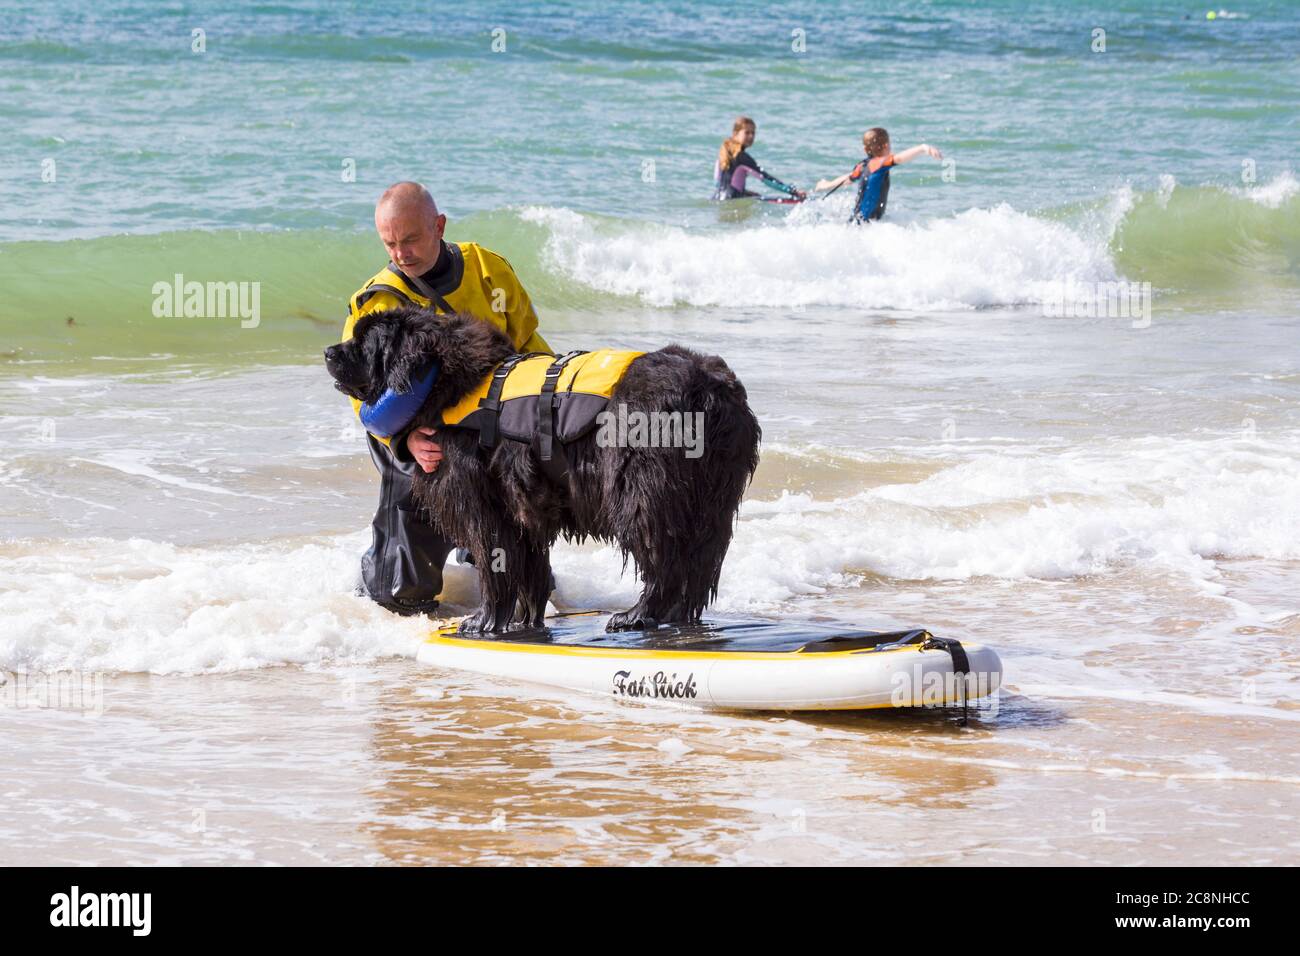 Poole, Dorset UK. 26th July 2020. UK weather: very windy, but warm and sunny with rough waves at Poole beaches. Dogs and their owners have fun in the sea. Dog training - Newfoundland dog learning to paddleboard paddle board. Credit: Carolyn Jenkins/Alamy Live News Stock Photo